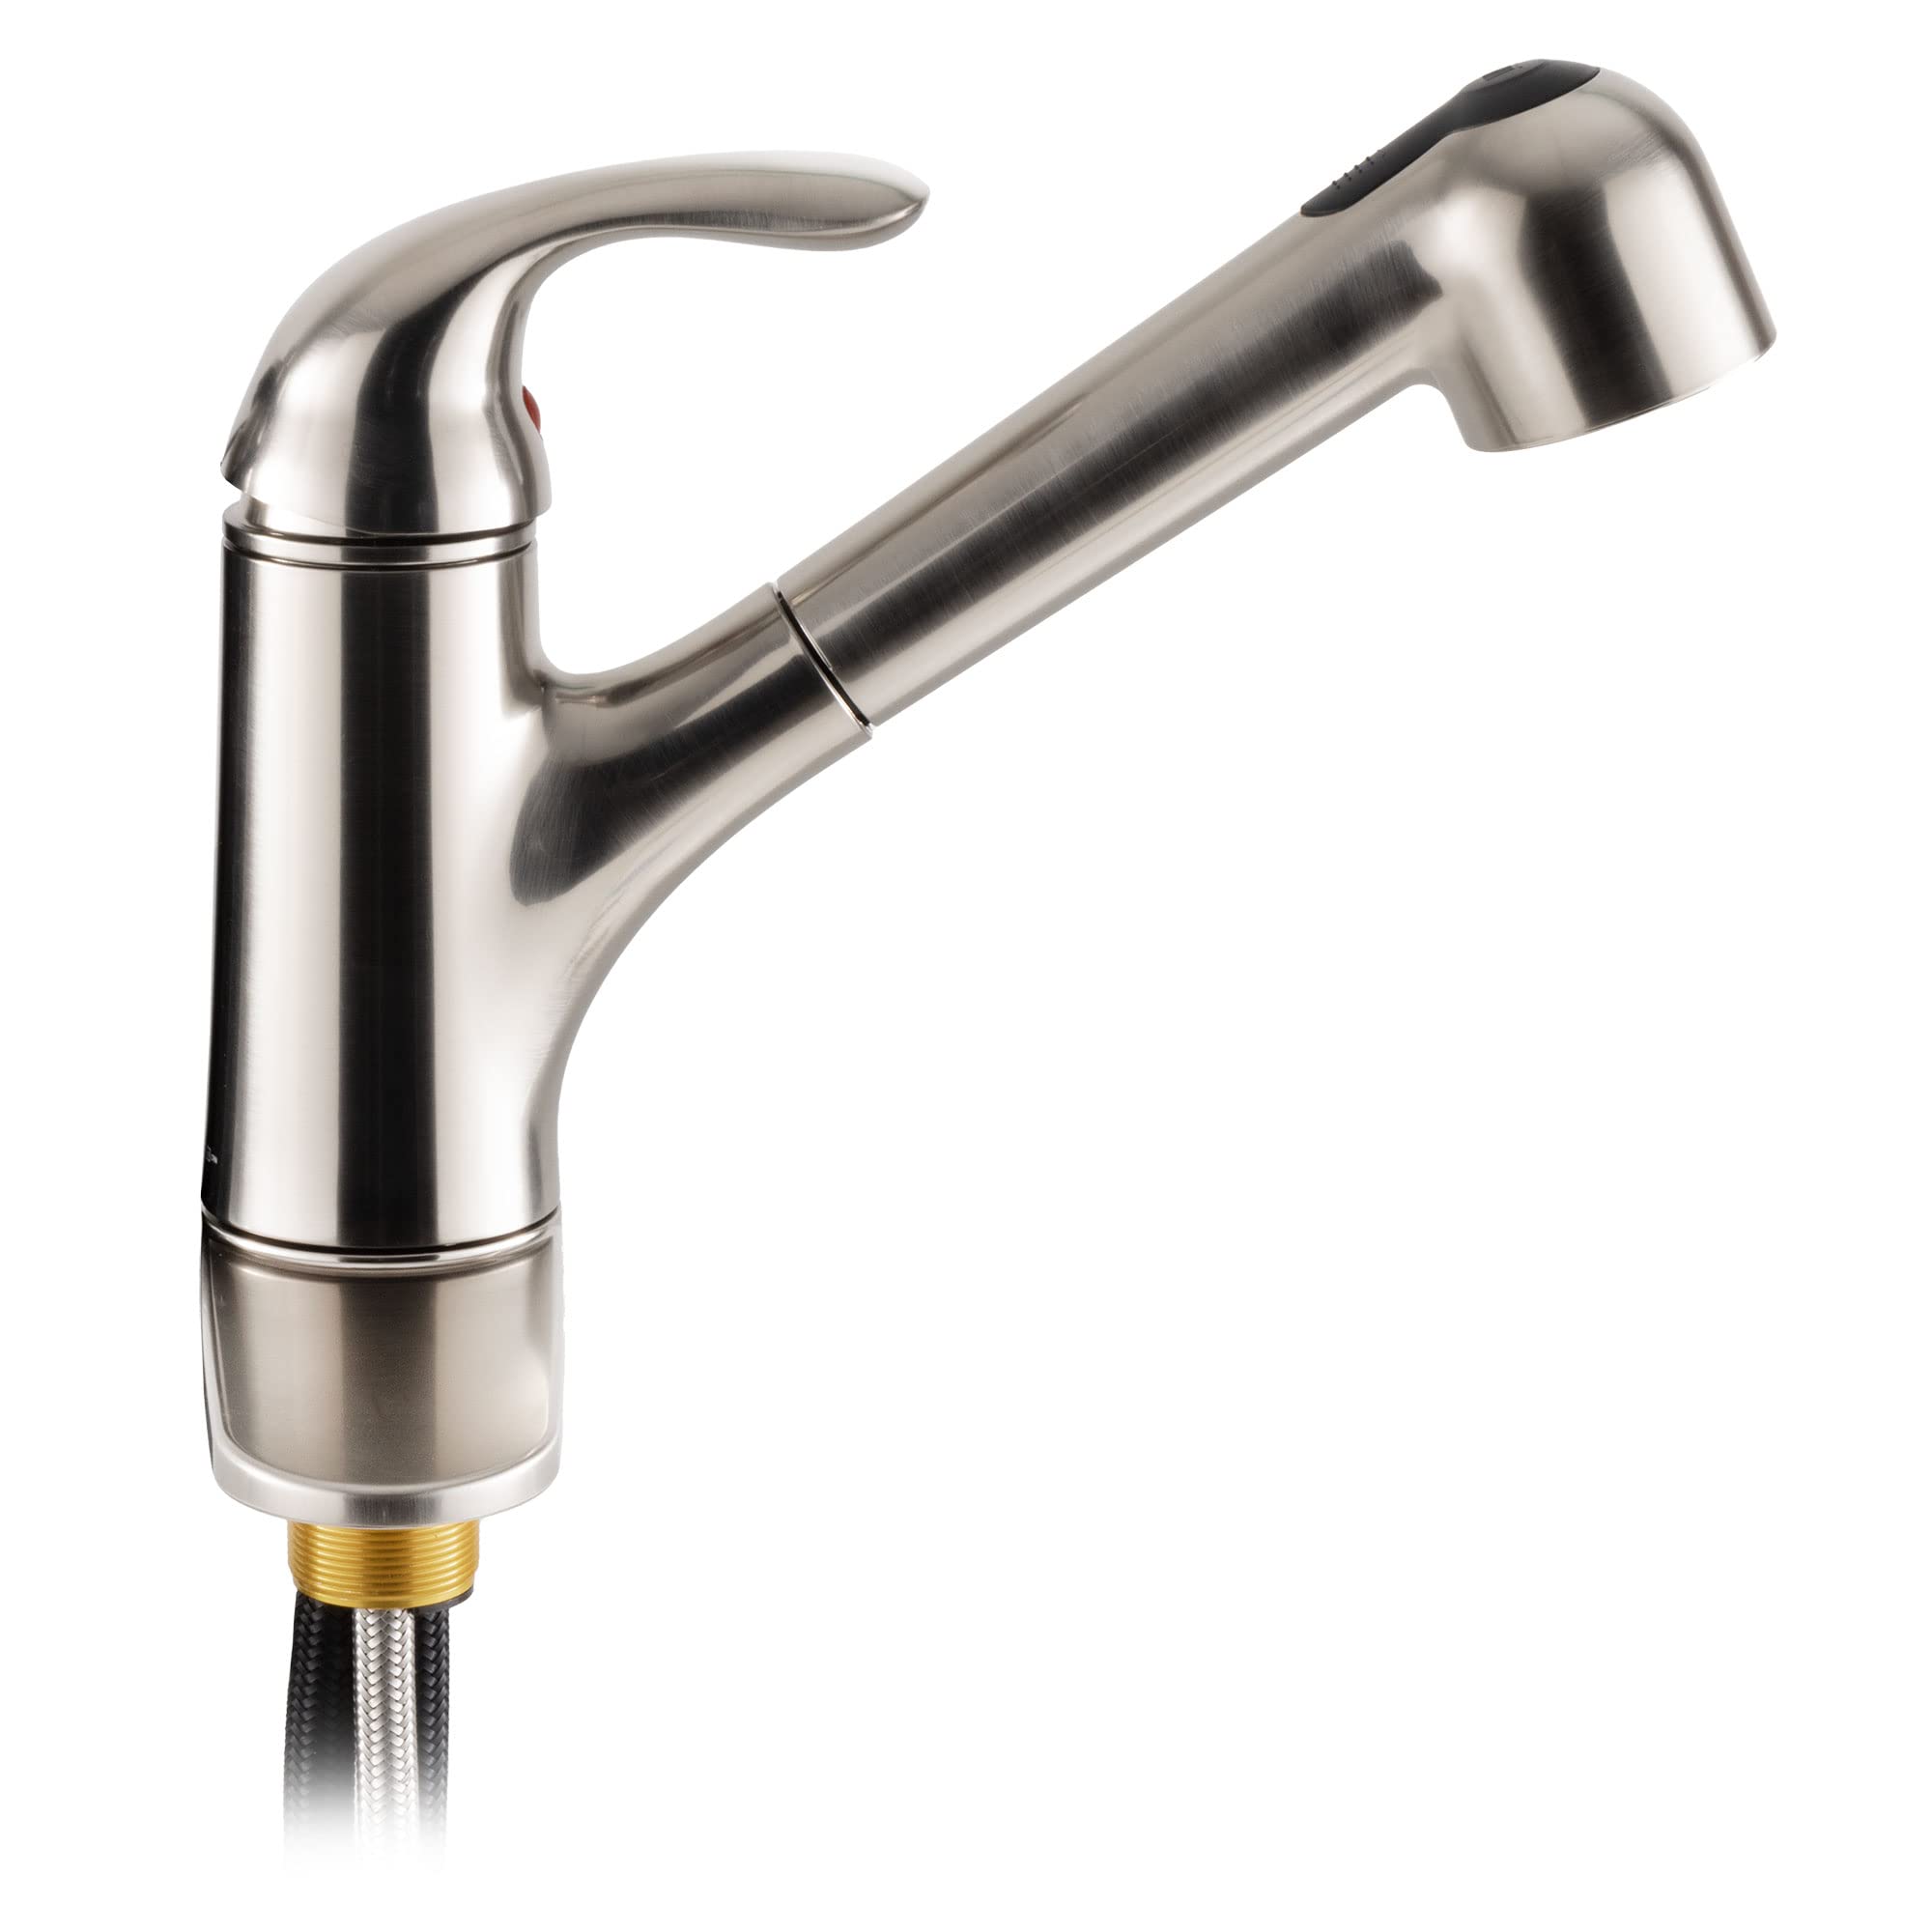 RecPro RV Kitchen Pull Out Faucet | Deck Brushed Nickel | WWFAU1 1812-50BN | Camper | Trailer | Fifth Wheel